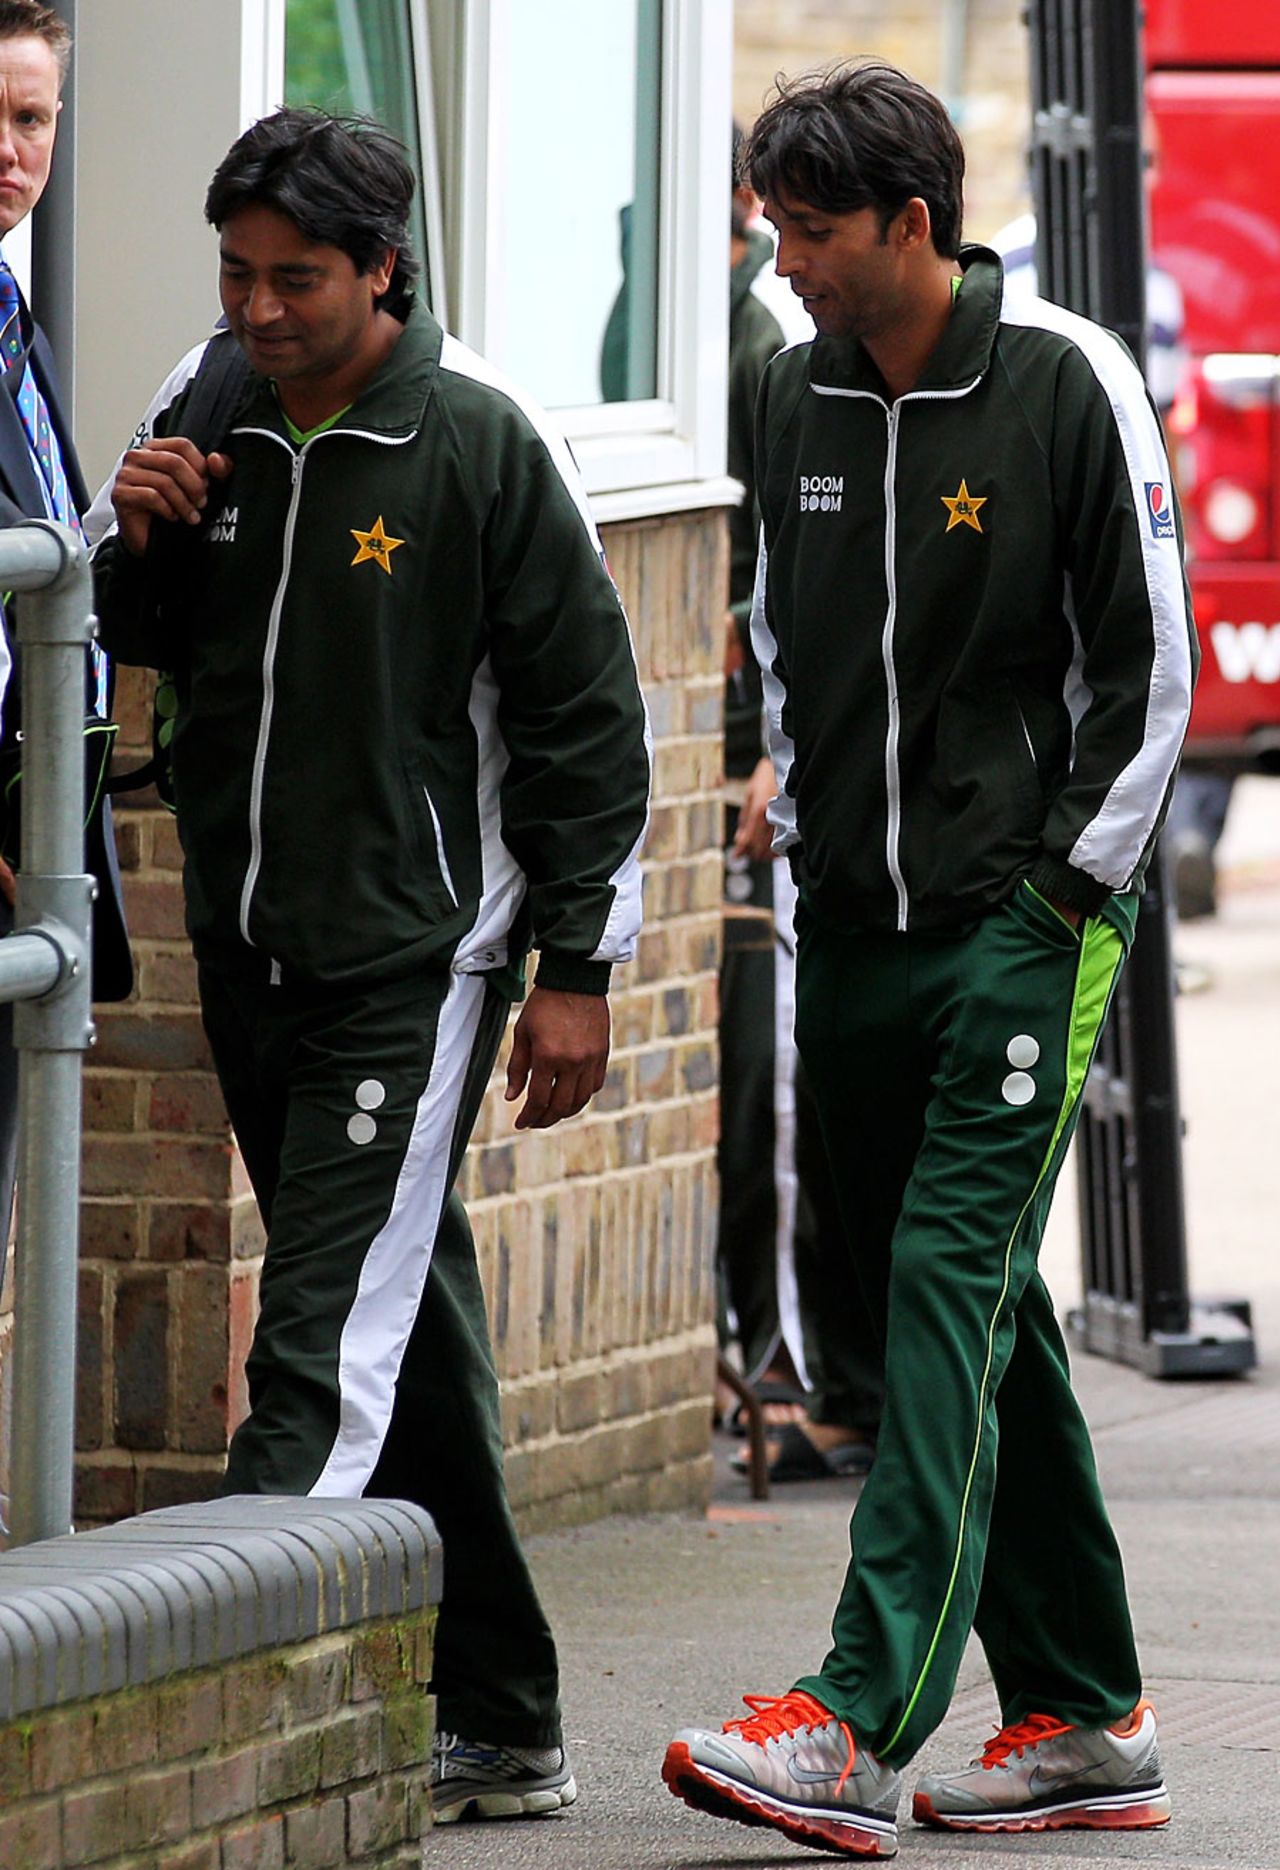 Mohammad Asif arrived for play on the fourth day with news the Test will go ahead despite the allegations of spot-fixing, England v Pakistan, 4th Test, Lord's, August 29, 2010